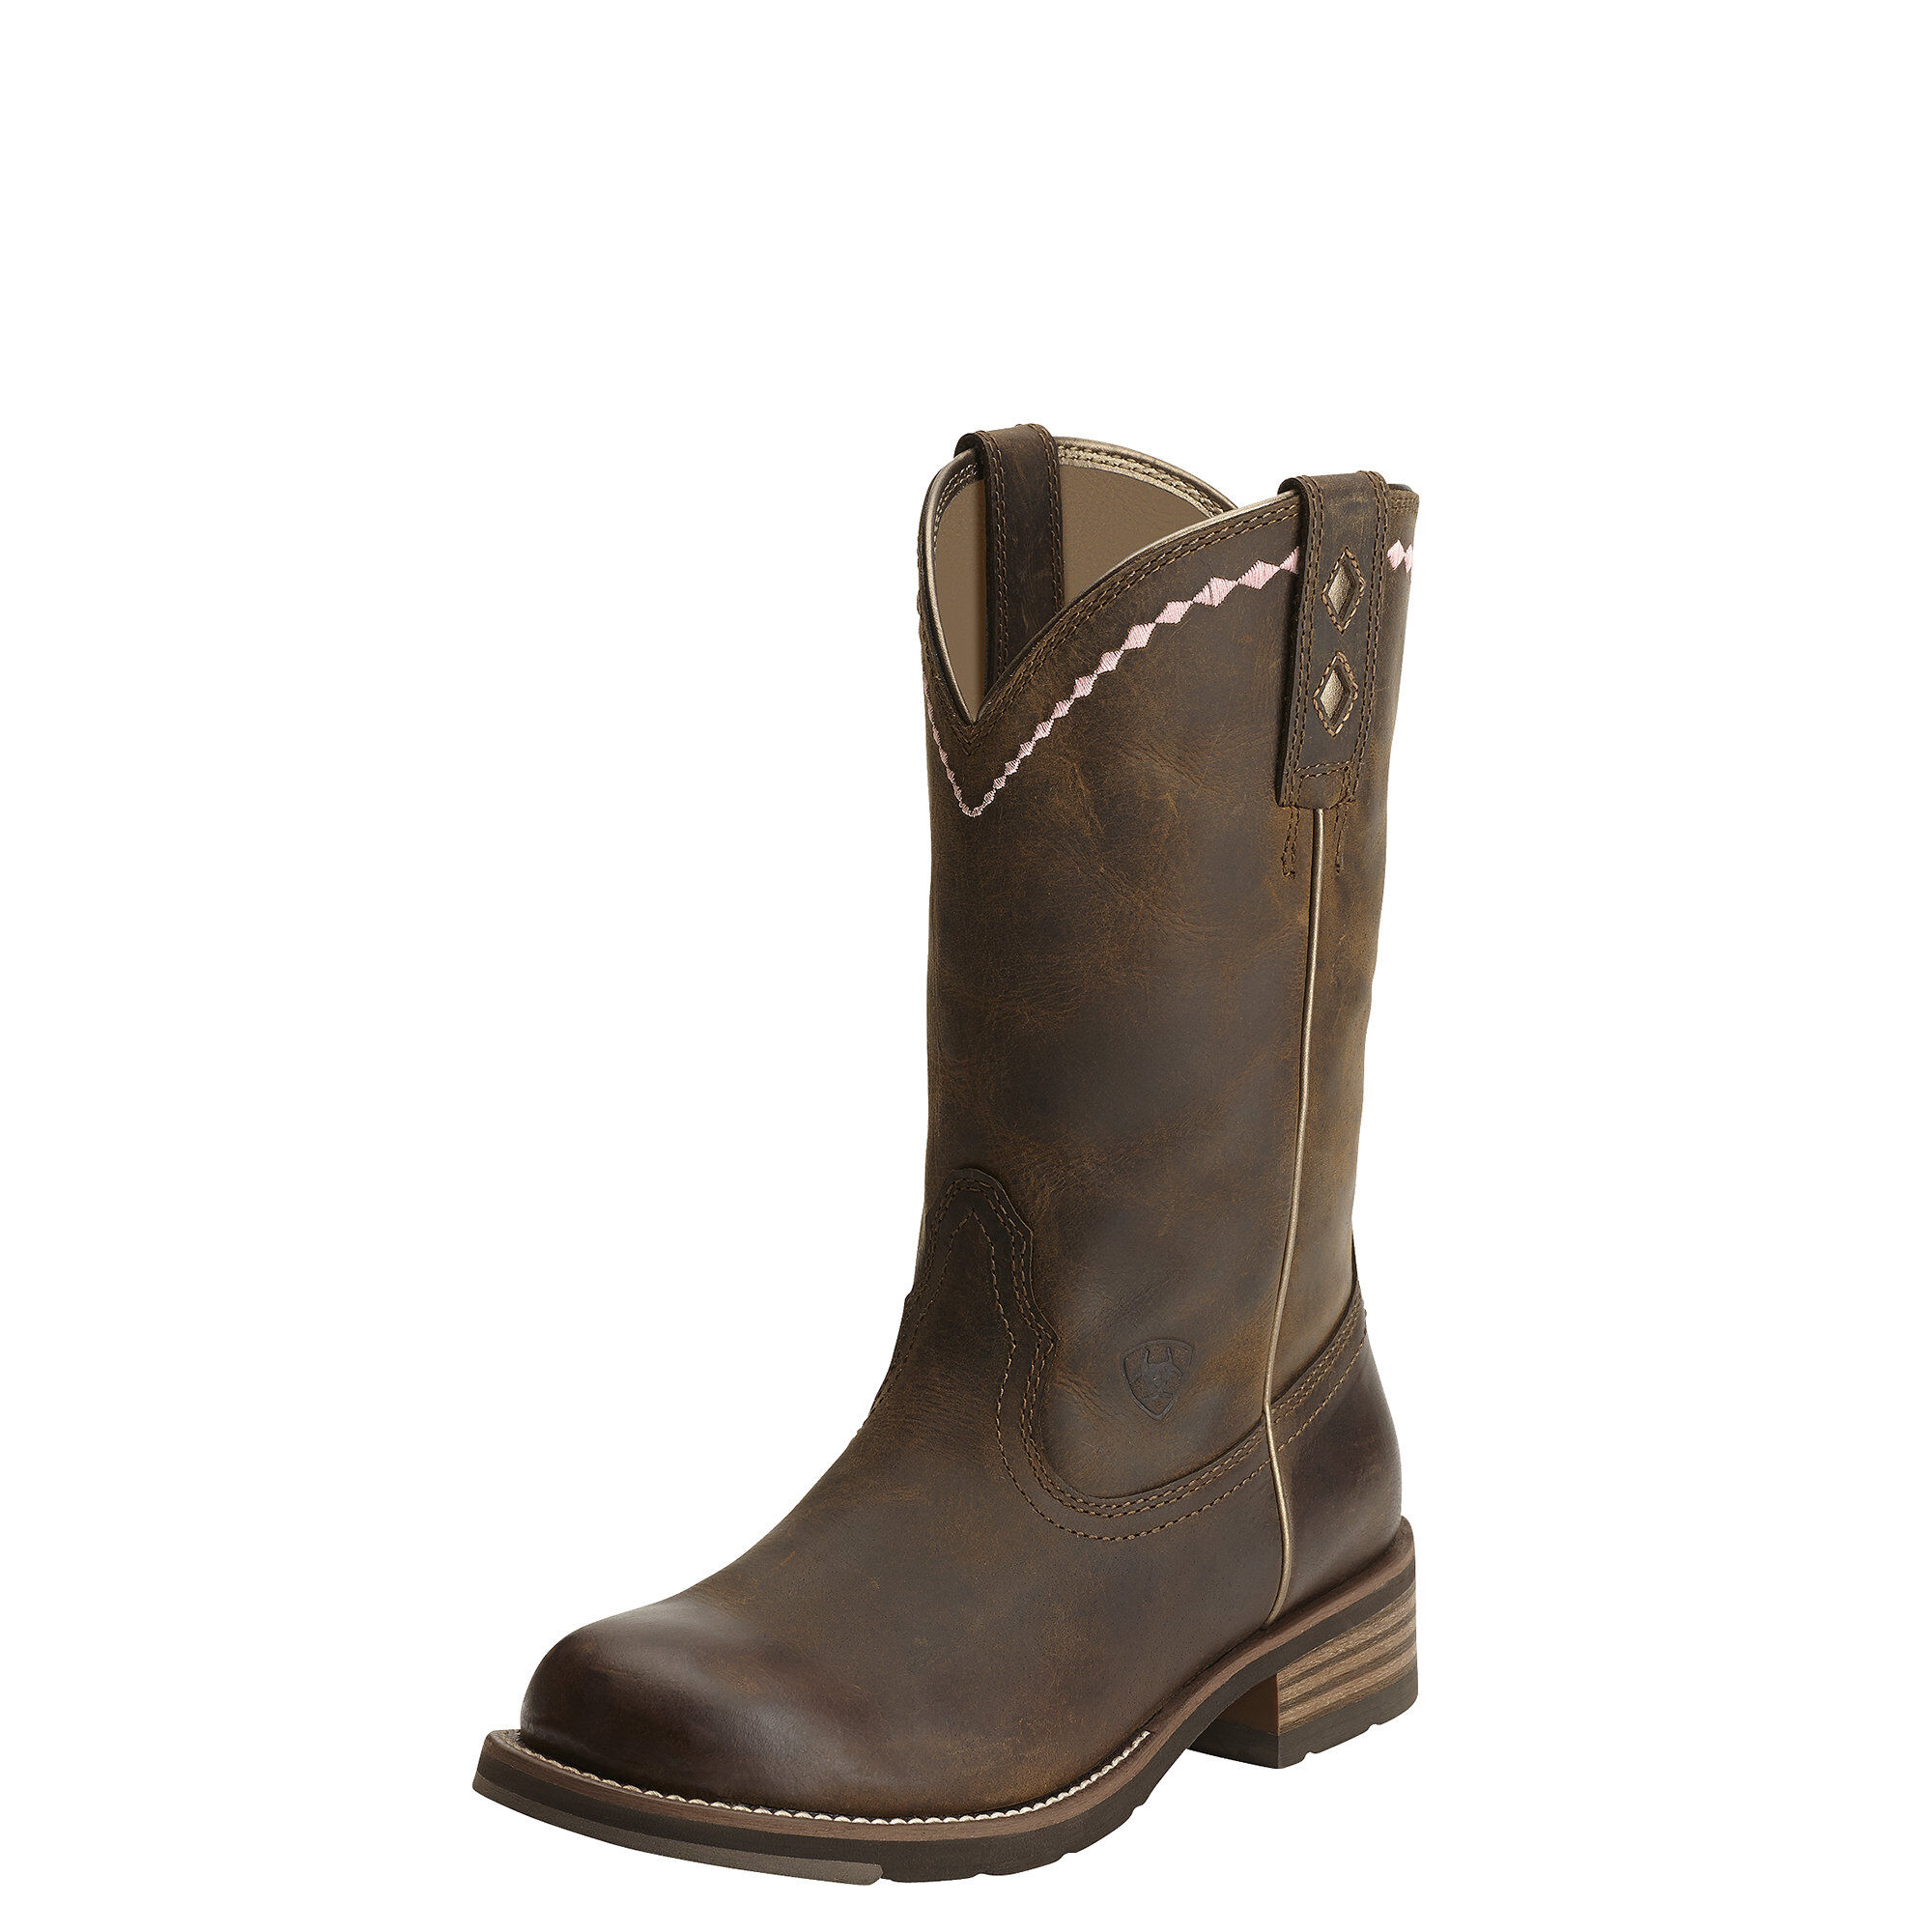 Women's Unbridled Roper Western Boots in Distressed Brown Leather  by Ariat